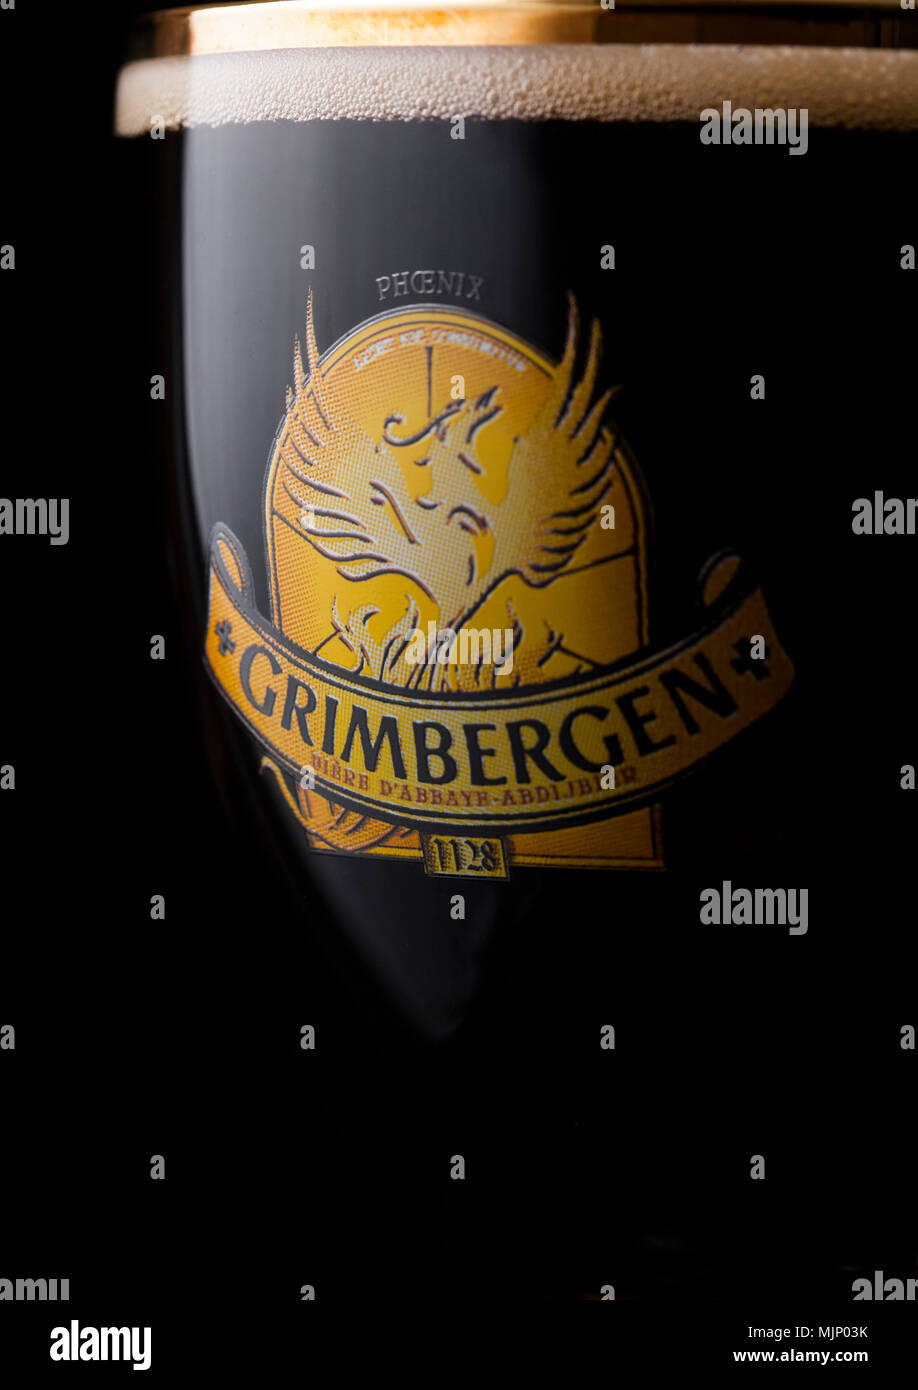 LONDON, UK - MAY 03, 2018: Cold Glass of Grimbergen dubbel beer on black background. Stock Photo